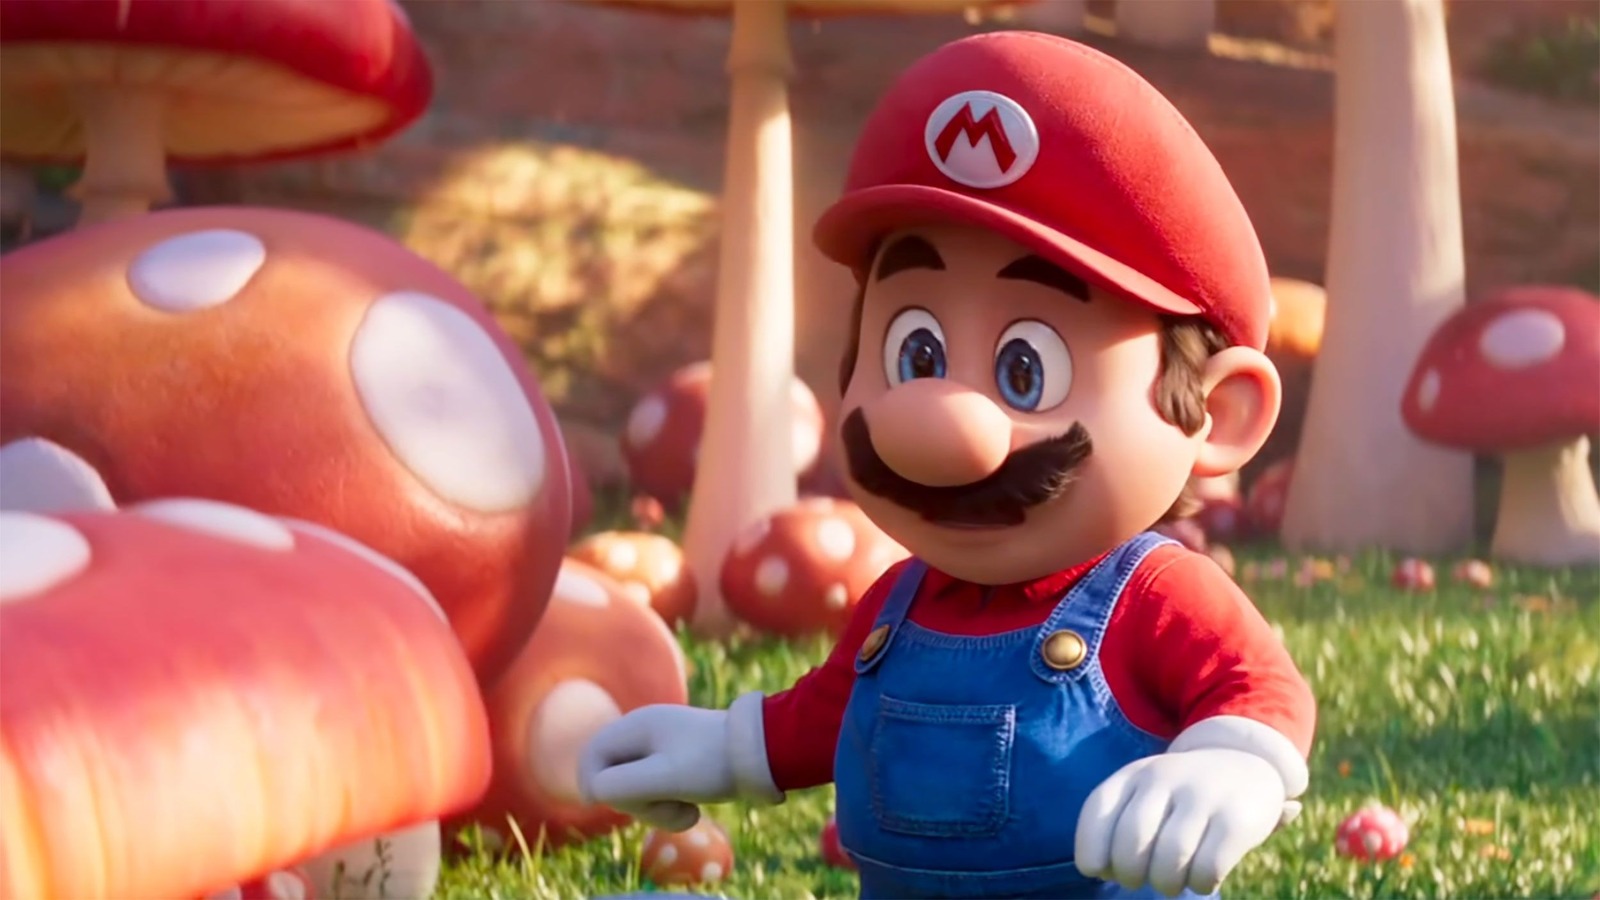 Nintendo Revealed Mario's New Video Game Voice, and Luckily It's Not Chris Pratt